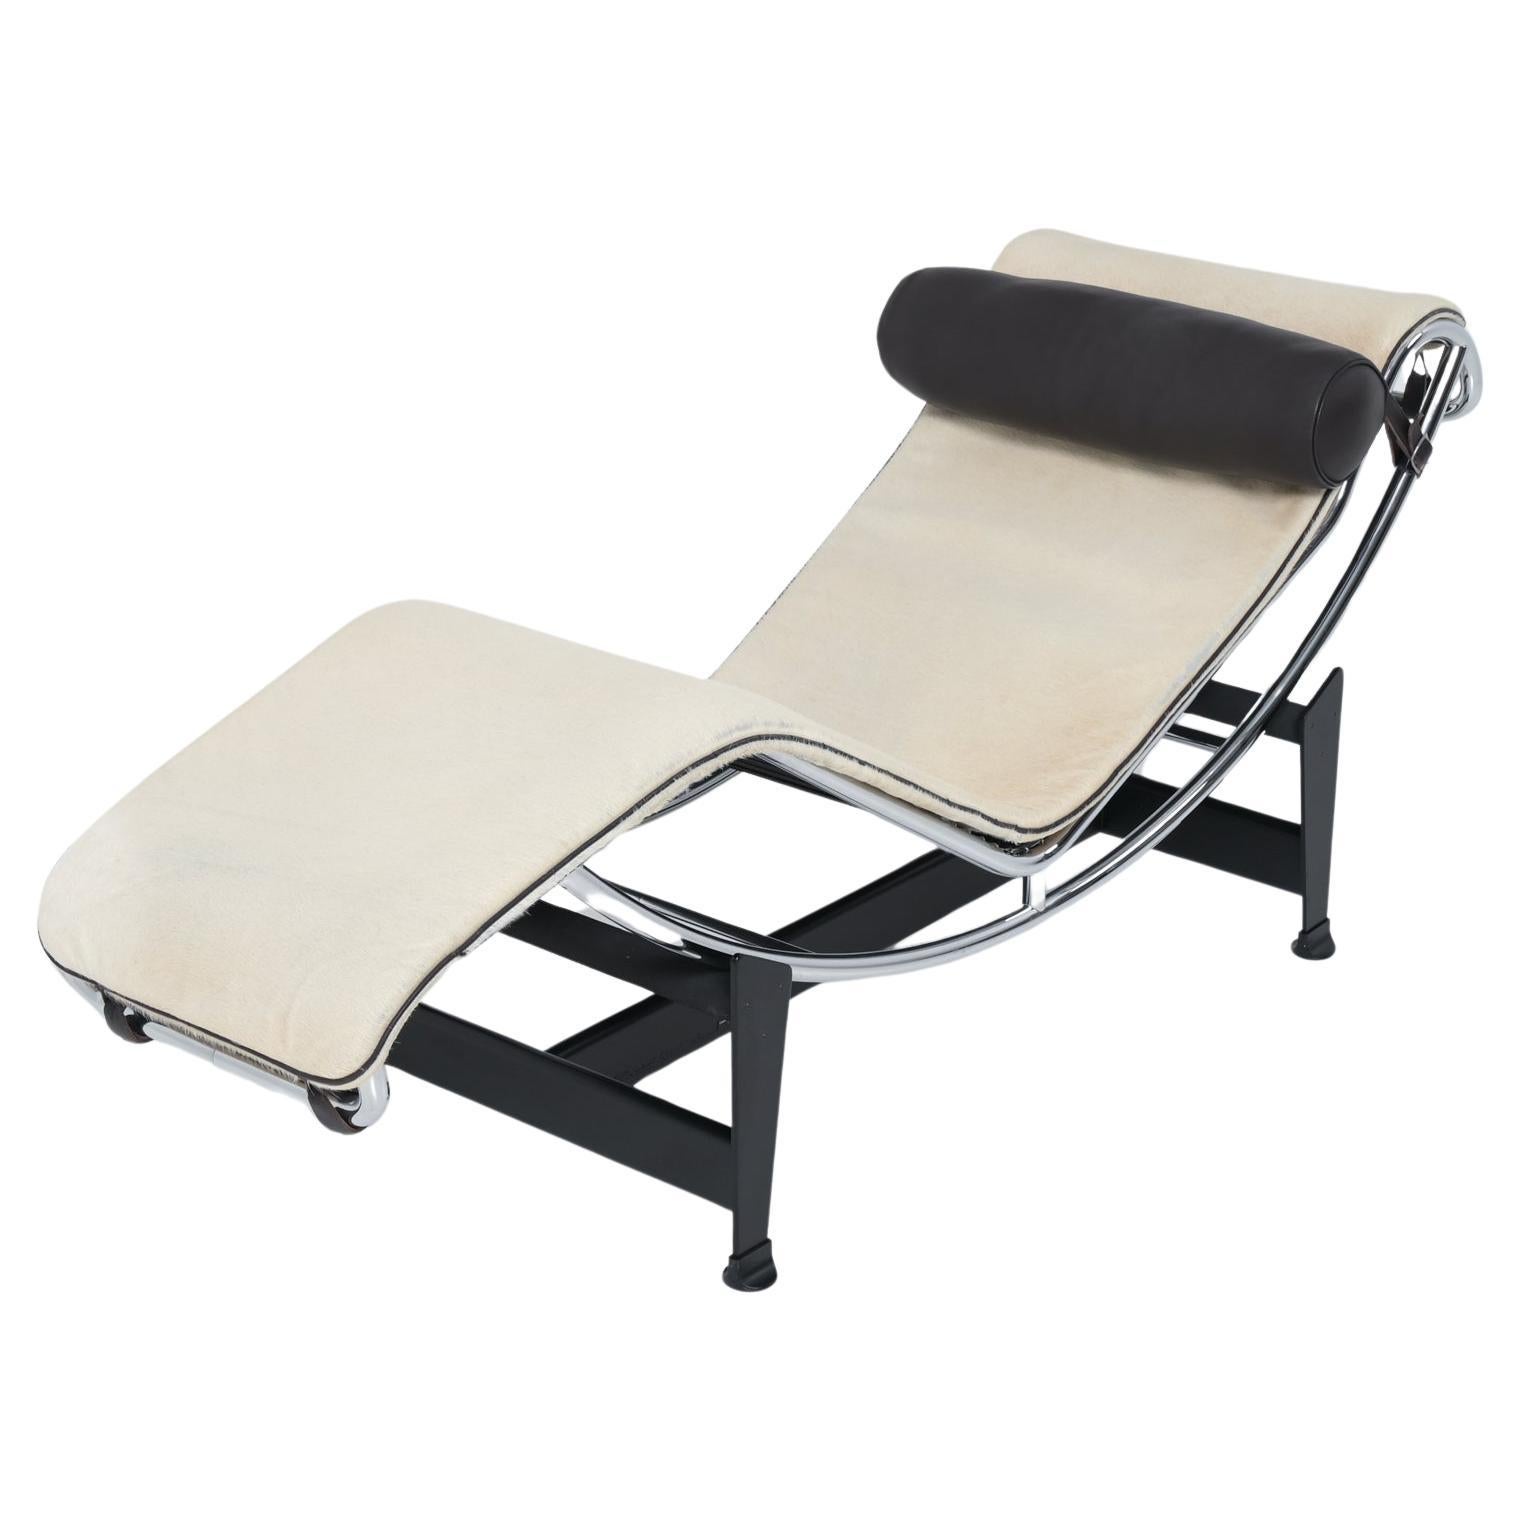 LC4 Lounge Chair by Le Corbusier, Jeanneret et Perriand for Cassina limited